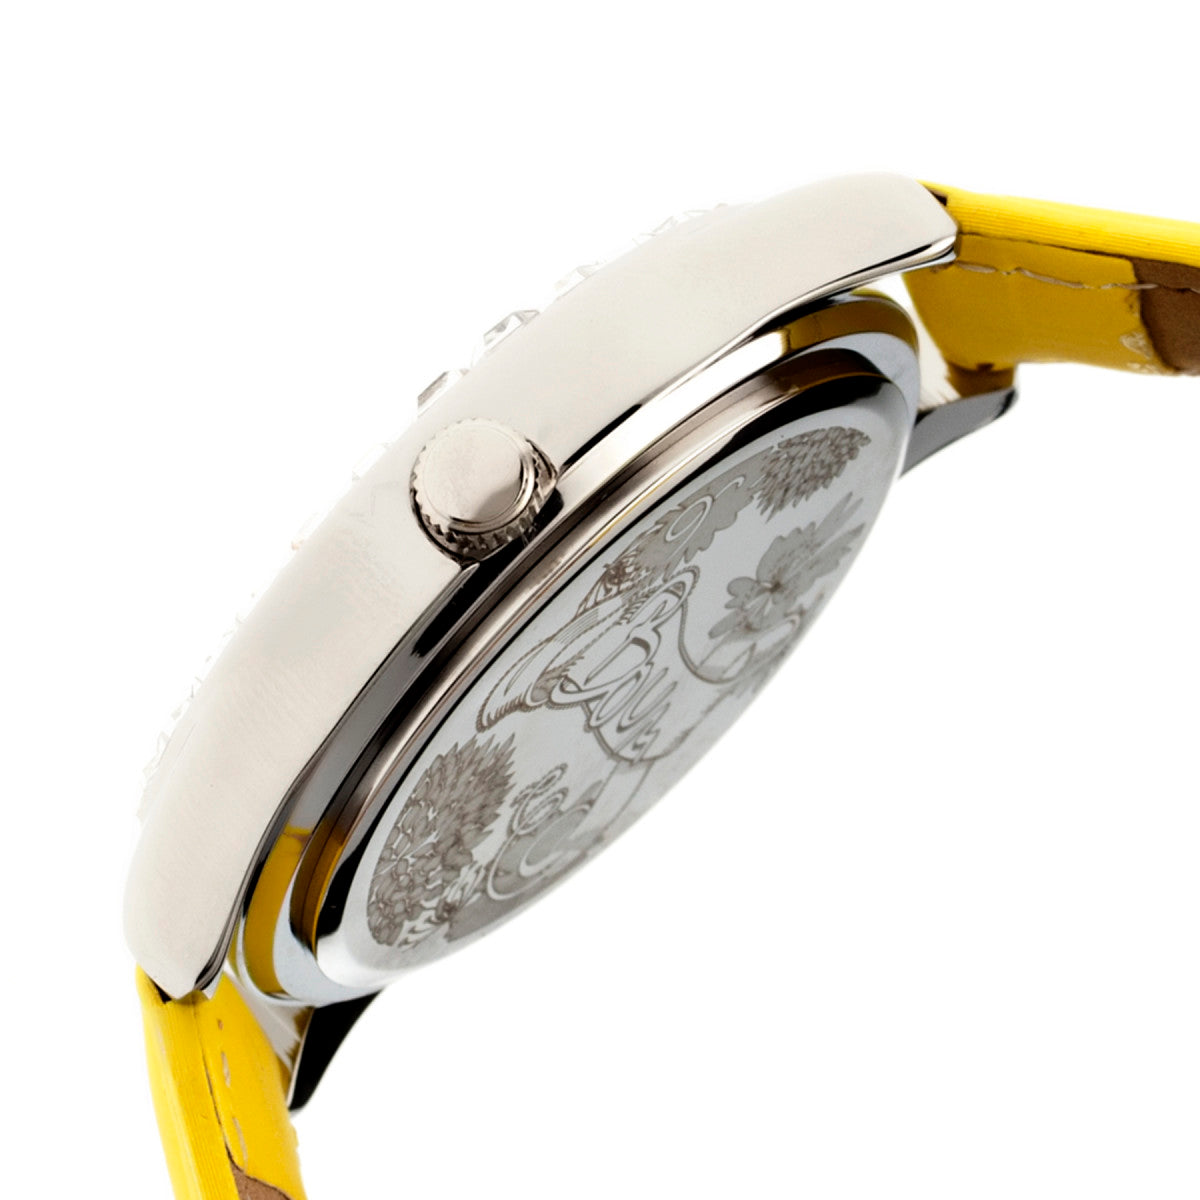 Boum Chic Mirror-Dial Leather-Band Ladies Watch - Silver/Yellow - BOUBM2002